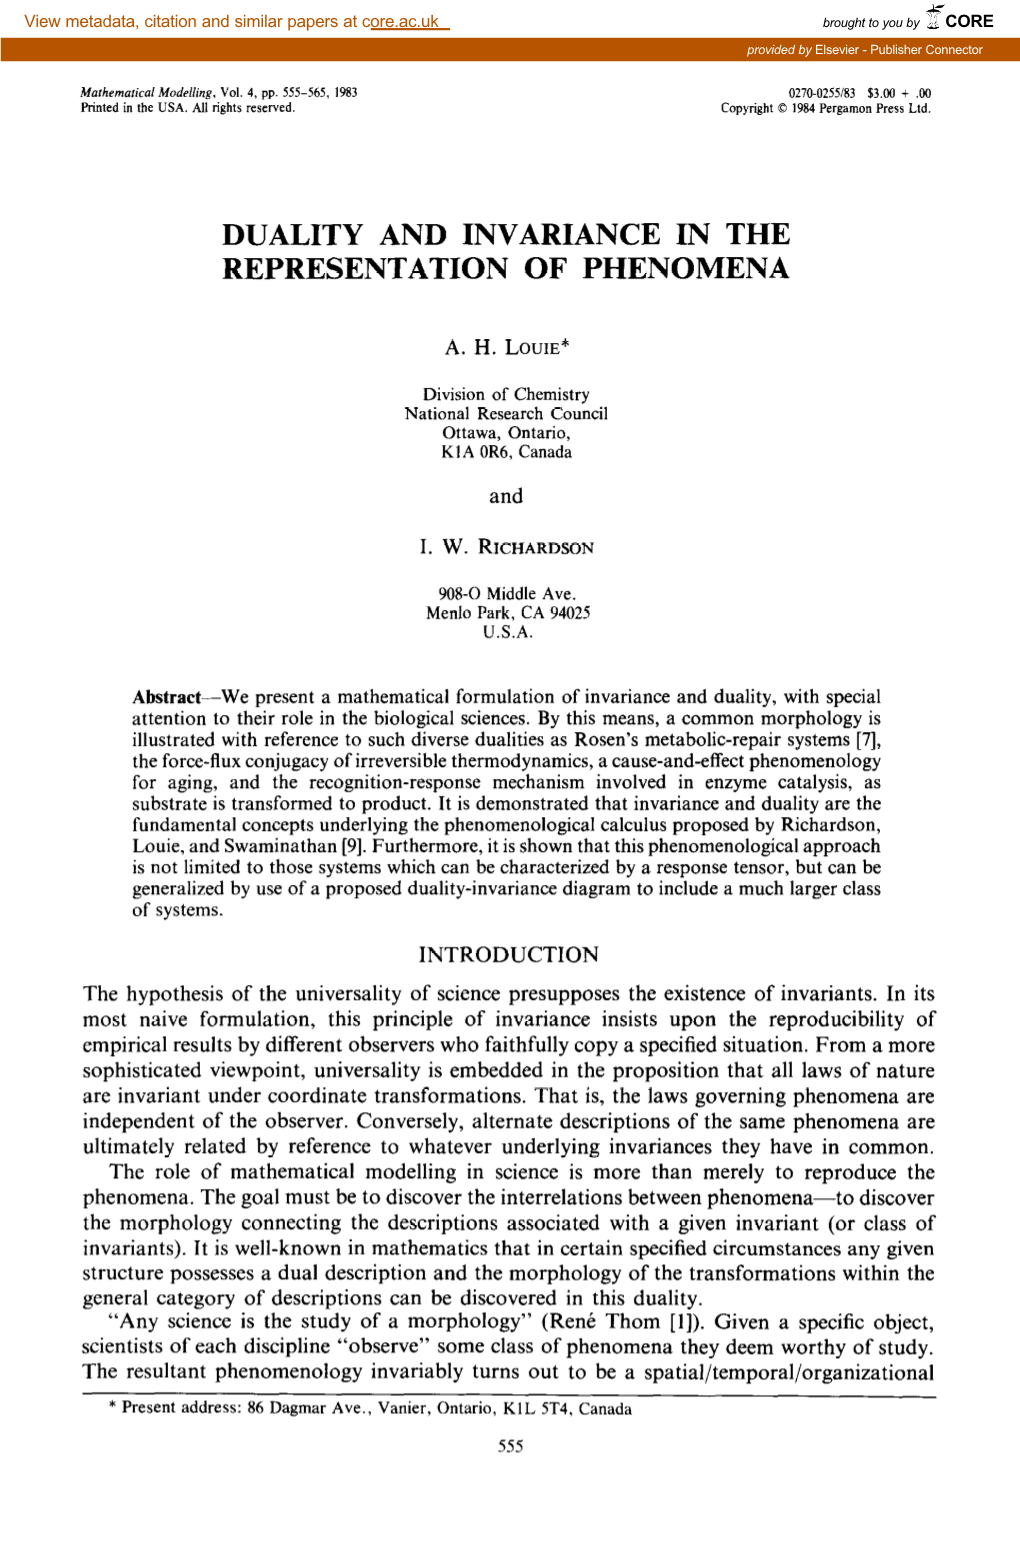 Duality and Invariance in the Representation of Phenomena